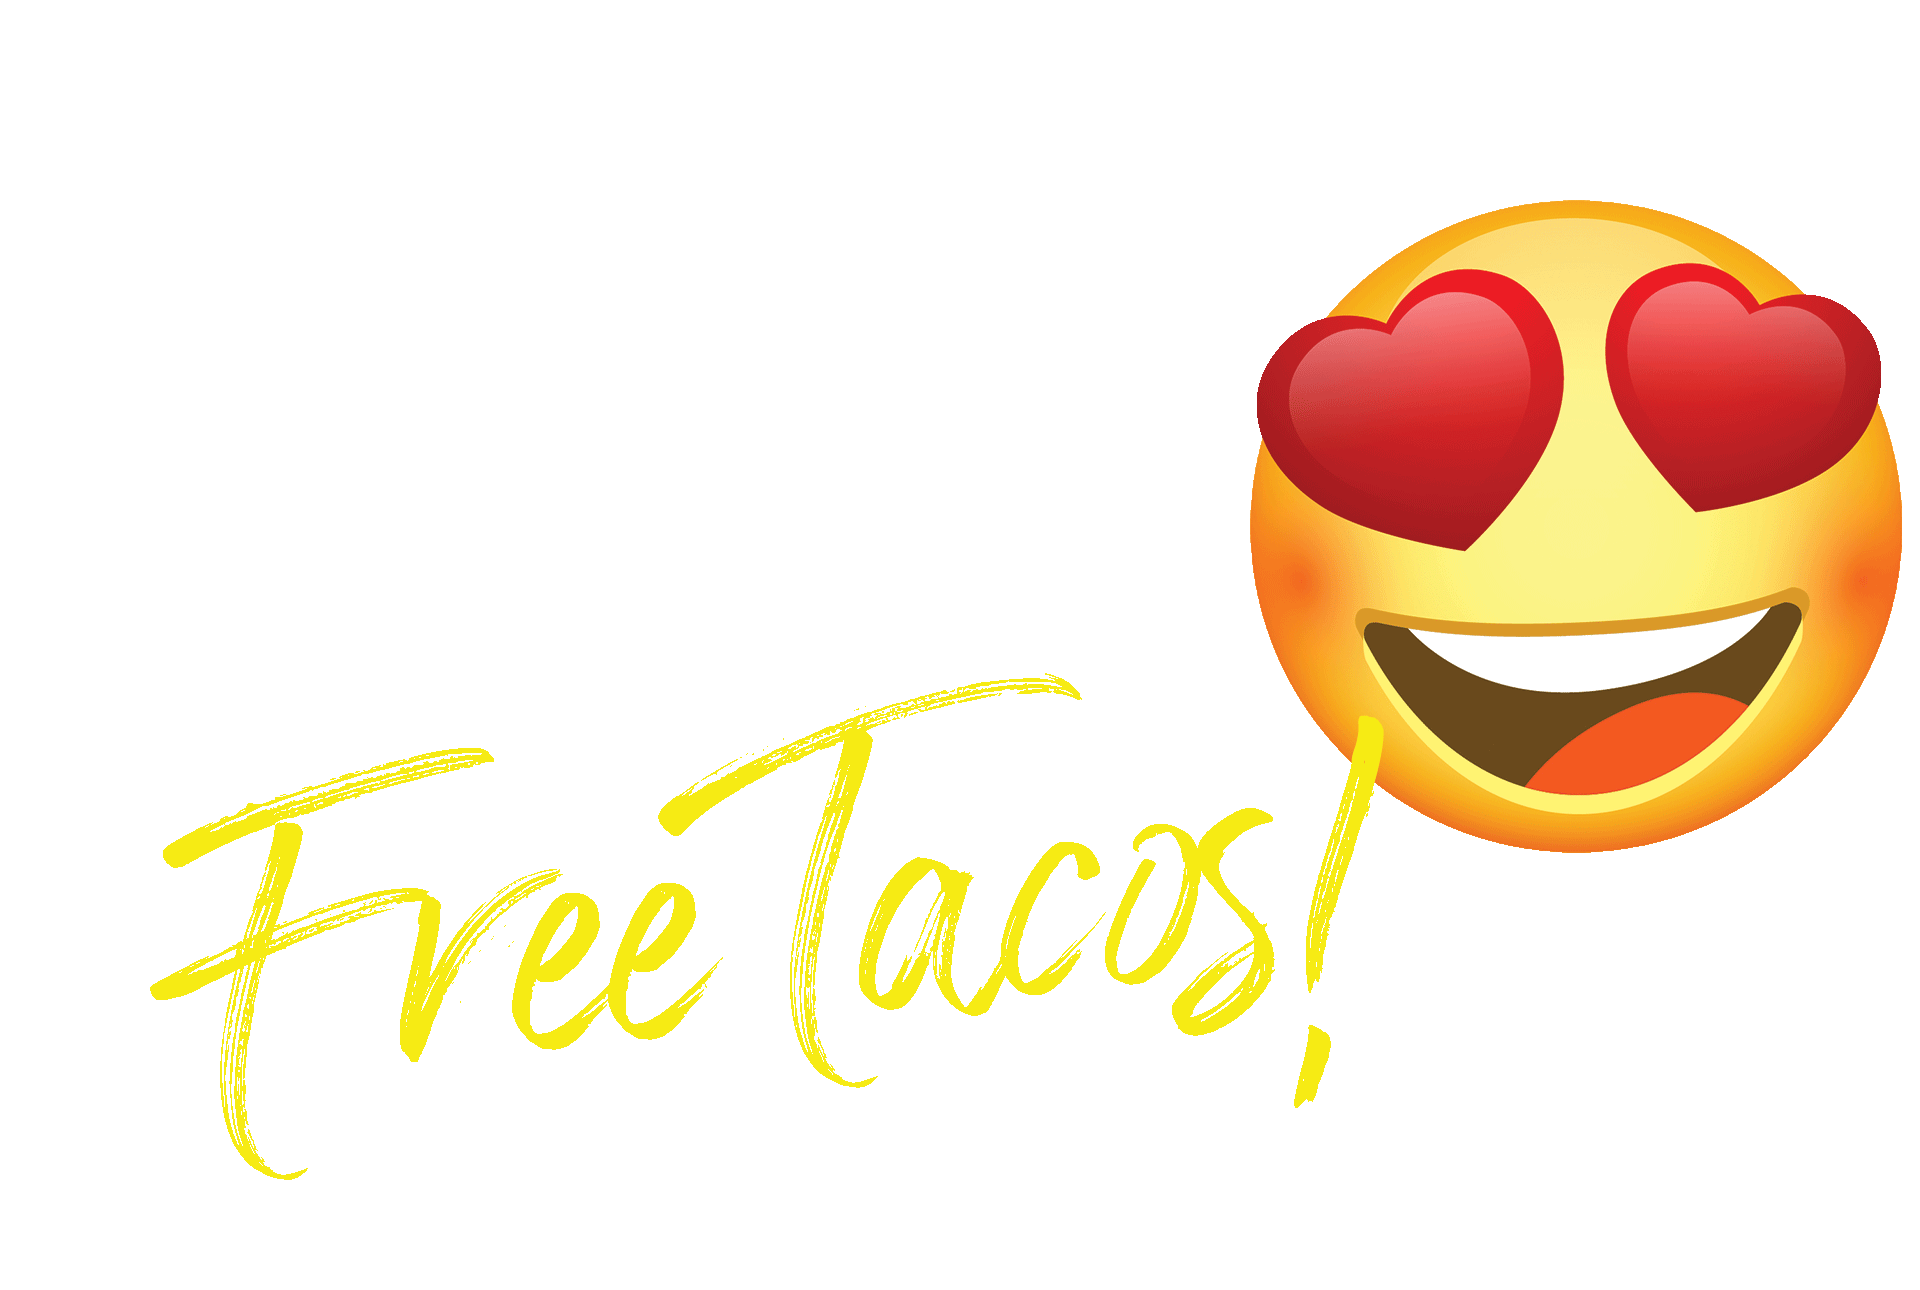 Free Taco Offer!